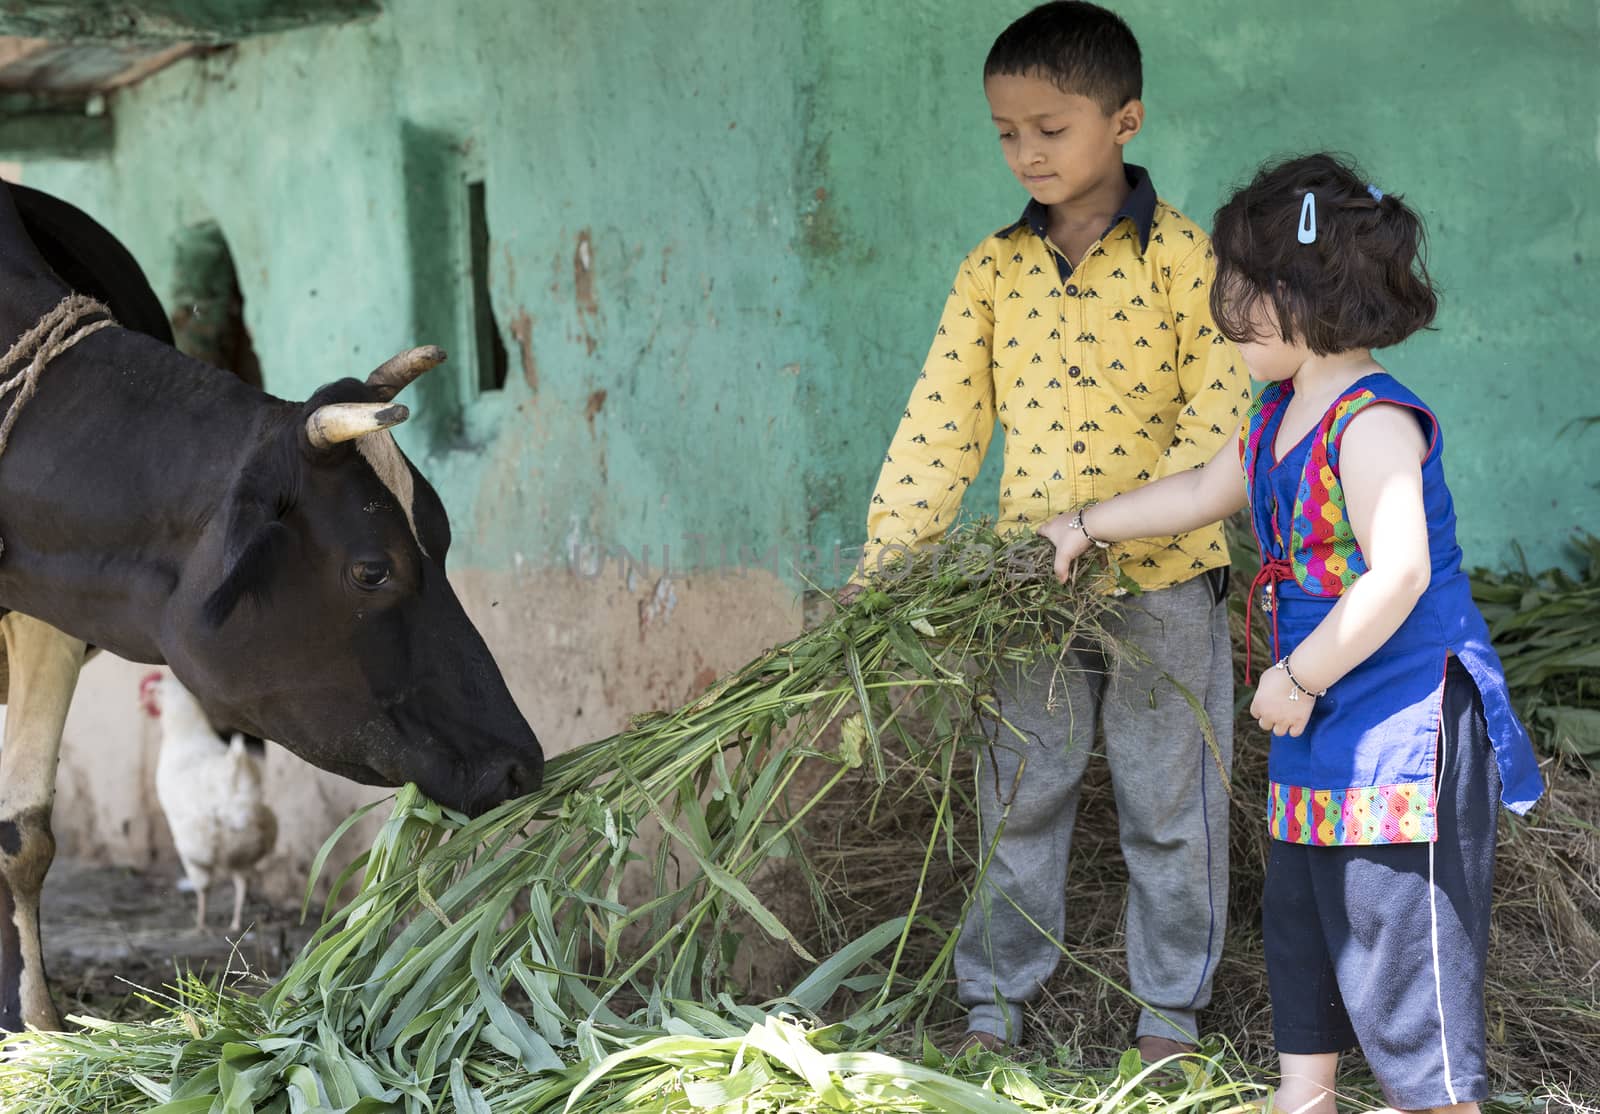 Cute little girl and her brother feeding a cow with grass outdoors in India.